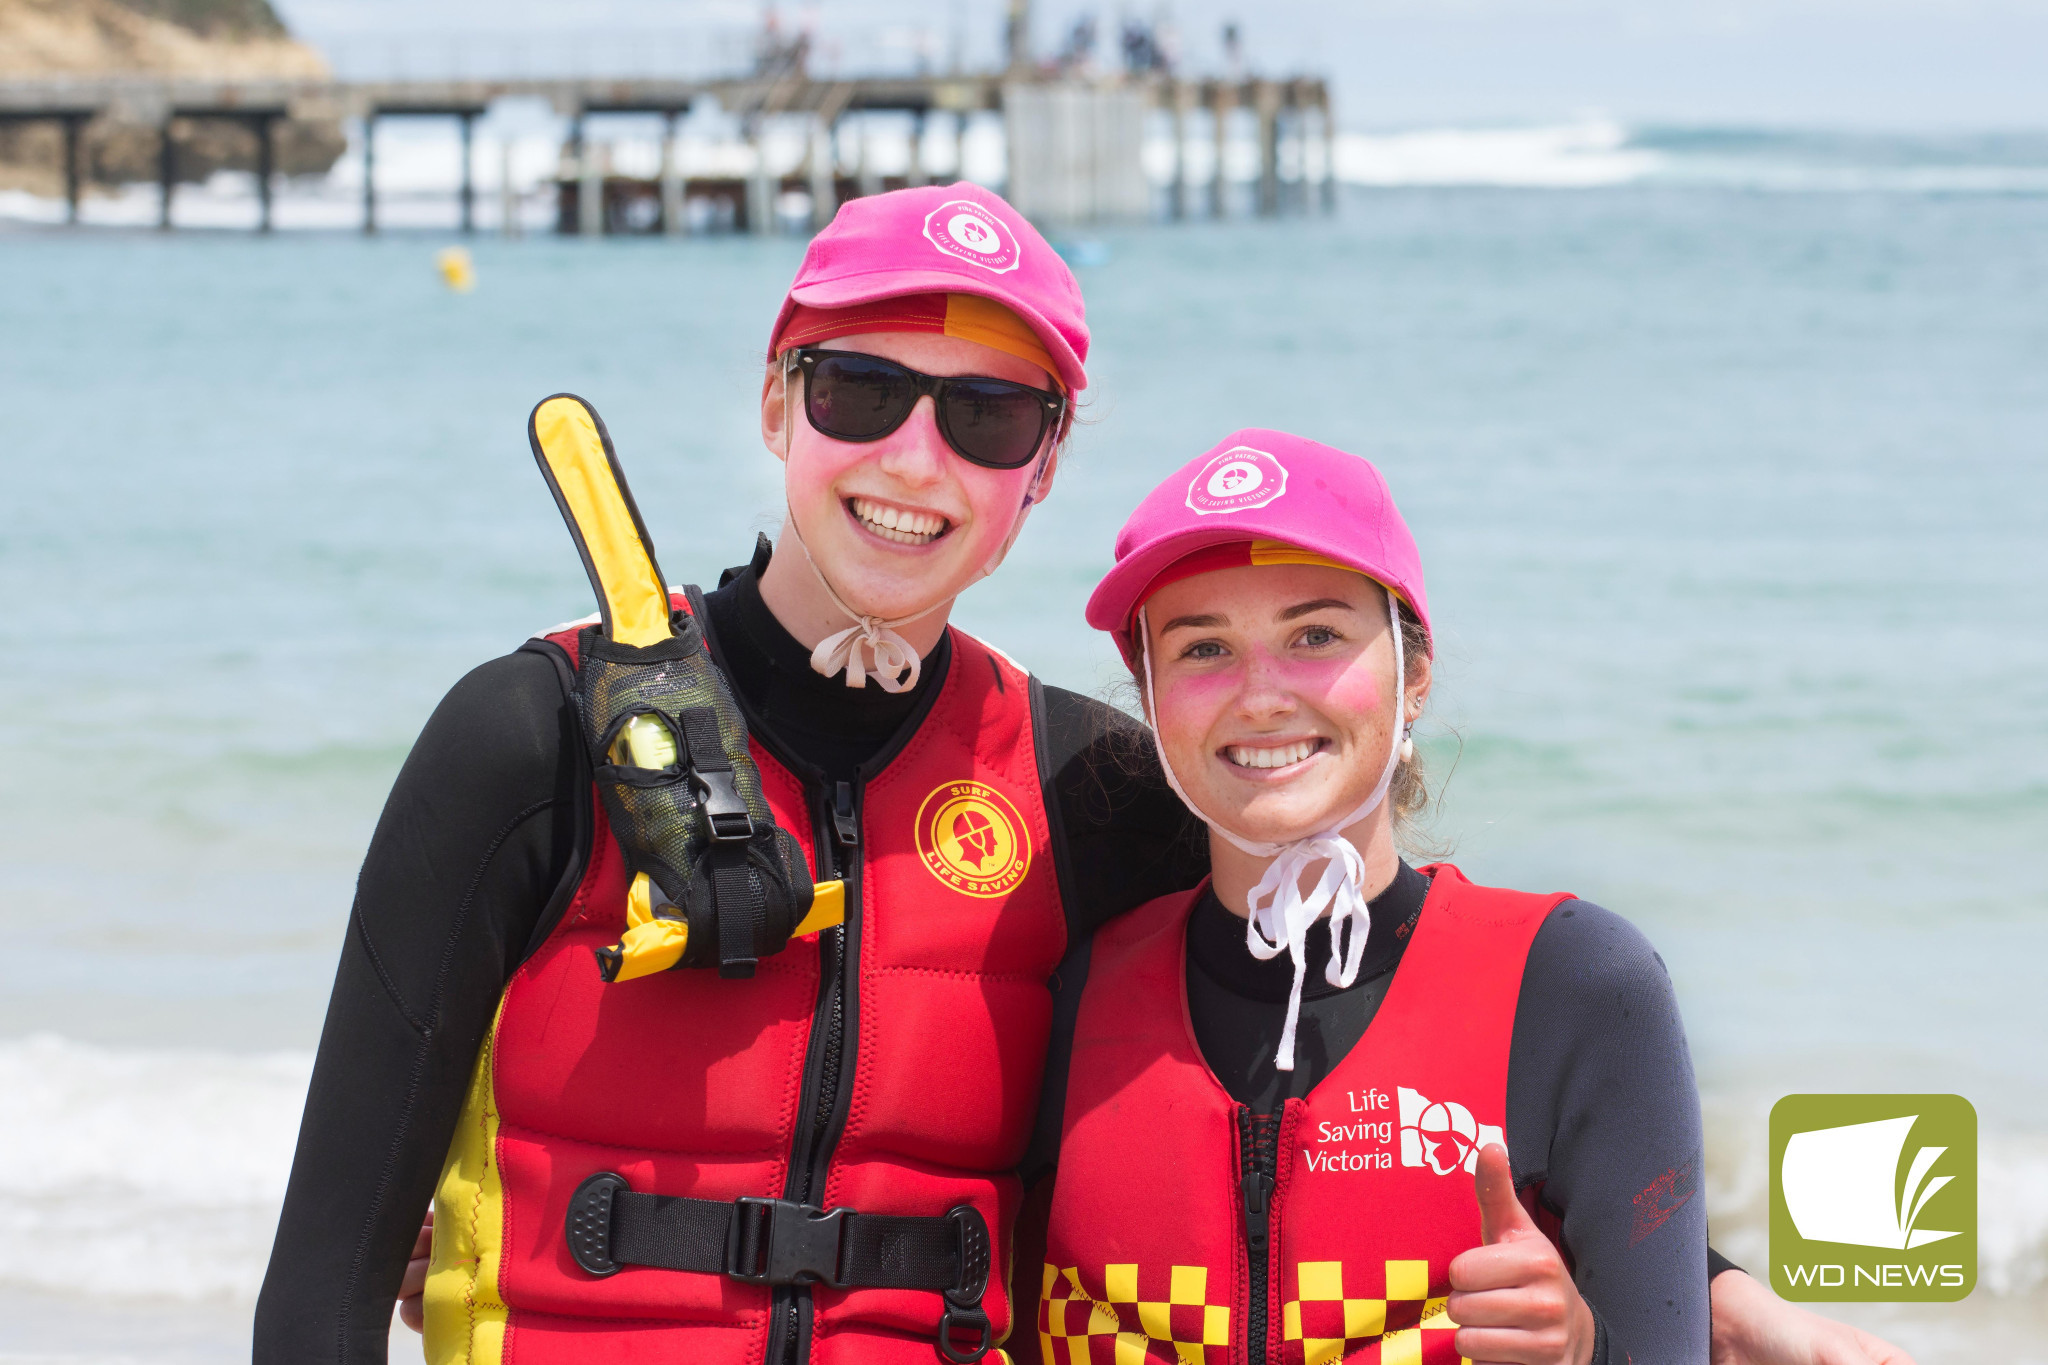 Congratulations: Susanna Ryan and Molly Jones, pictured together on the Port Campbell Surf Life Saving Club’s Pink Patrol early this season, received key awards at the club’s annual dinner over the weekend.